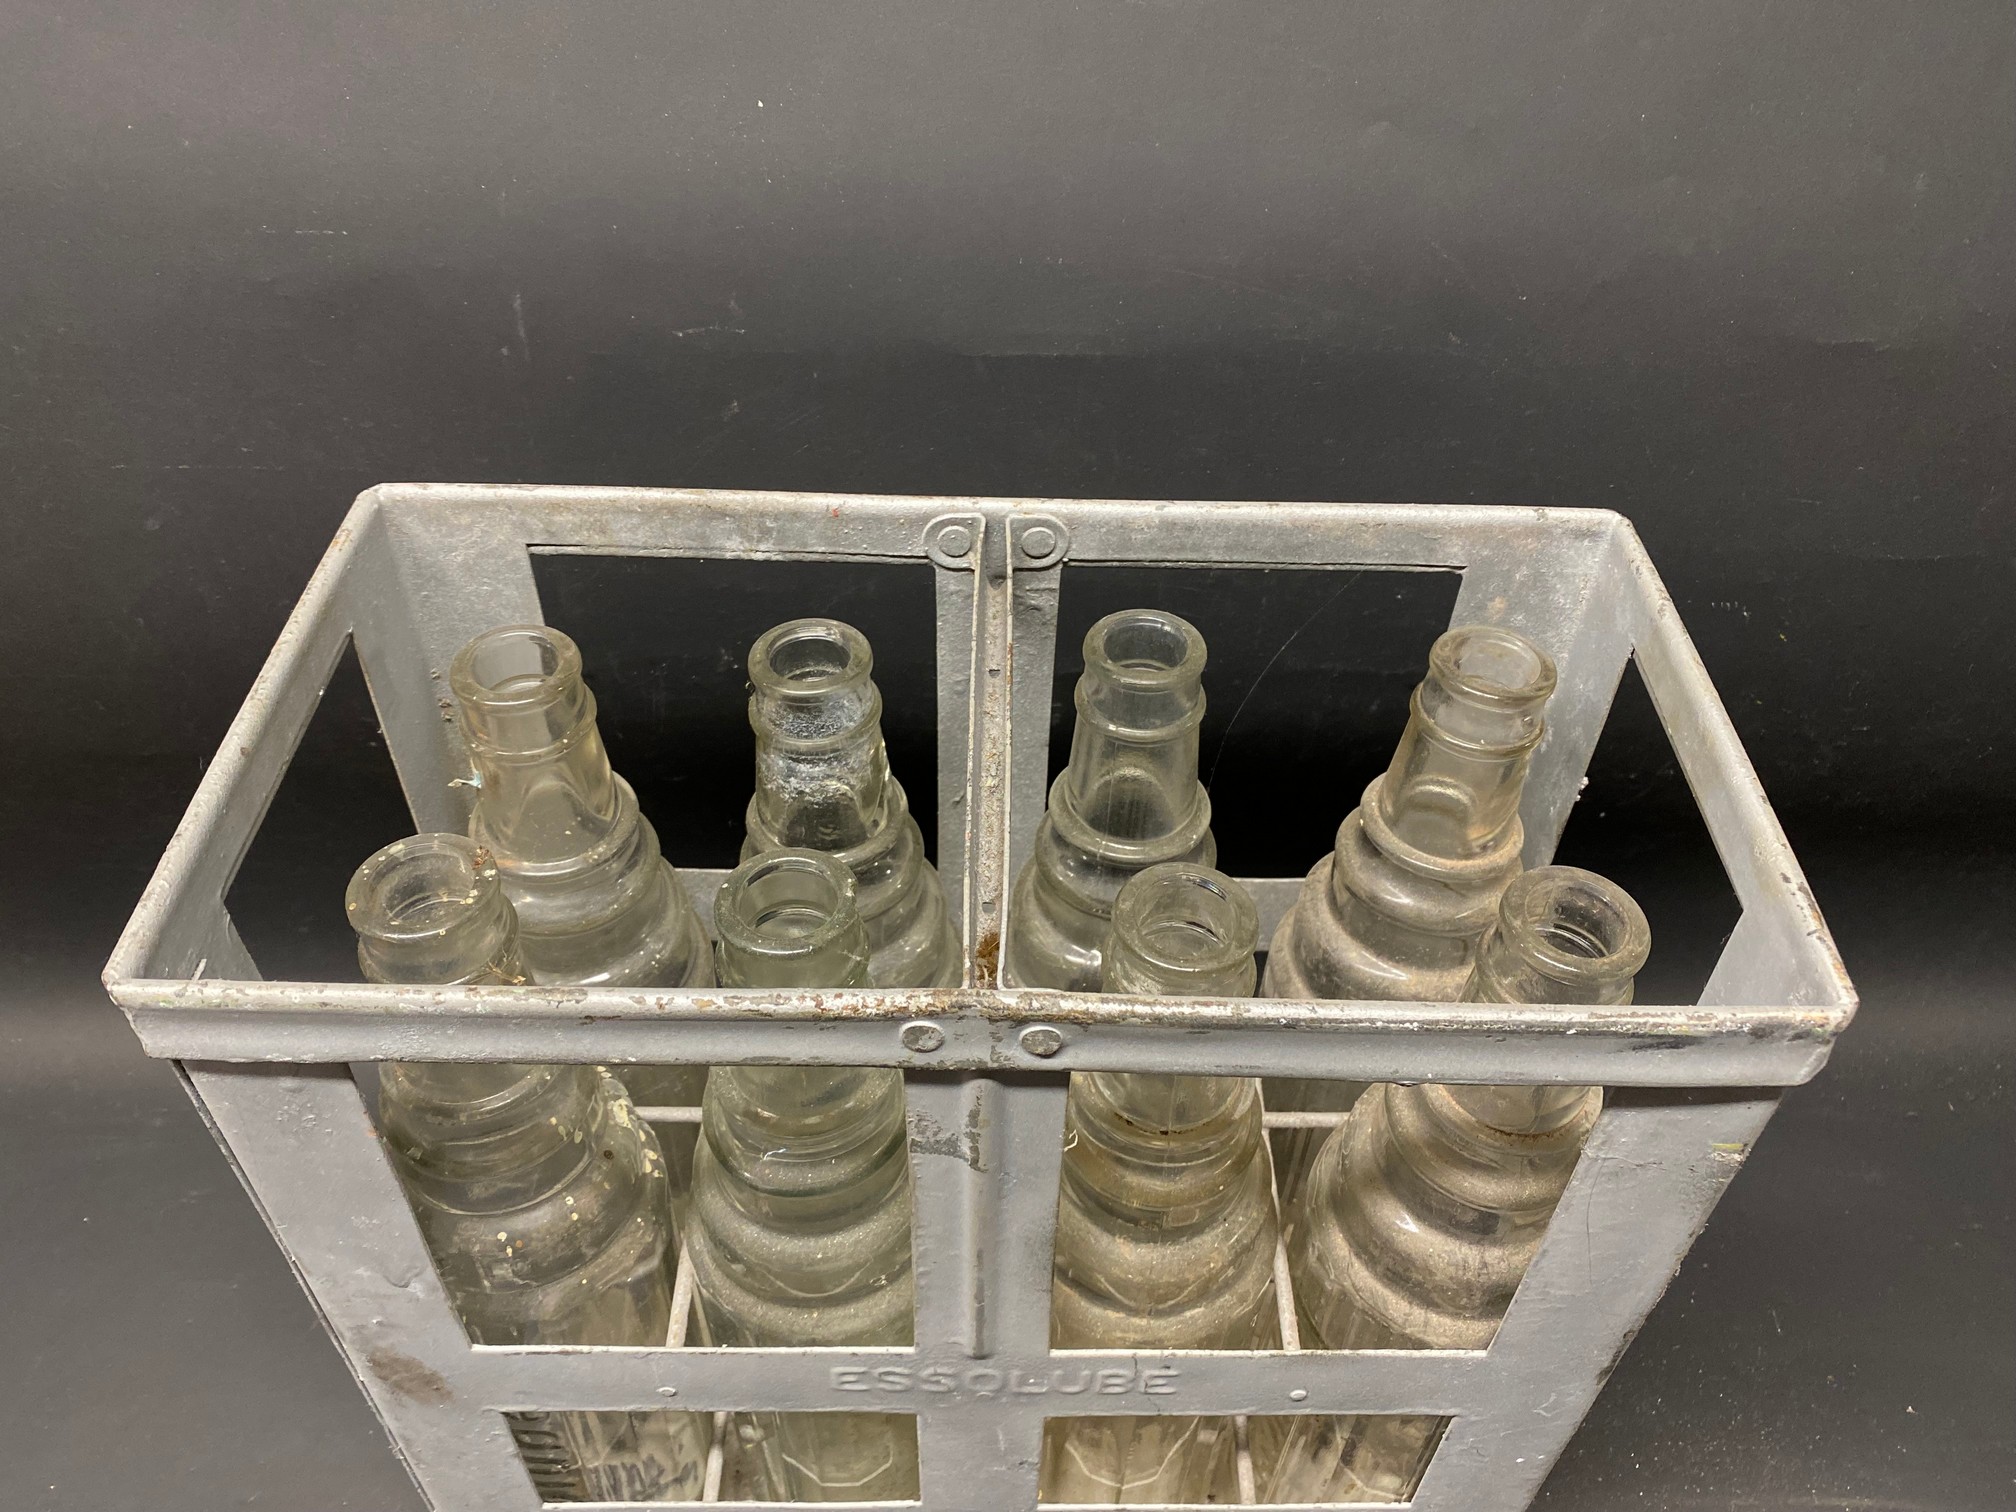 An Essolube eight division crate containing a full set of Essolube quart bottles. - Image 2 of 2